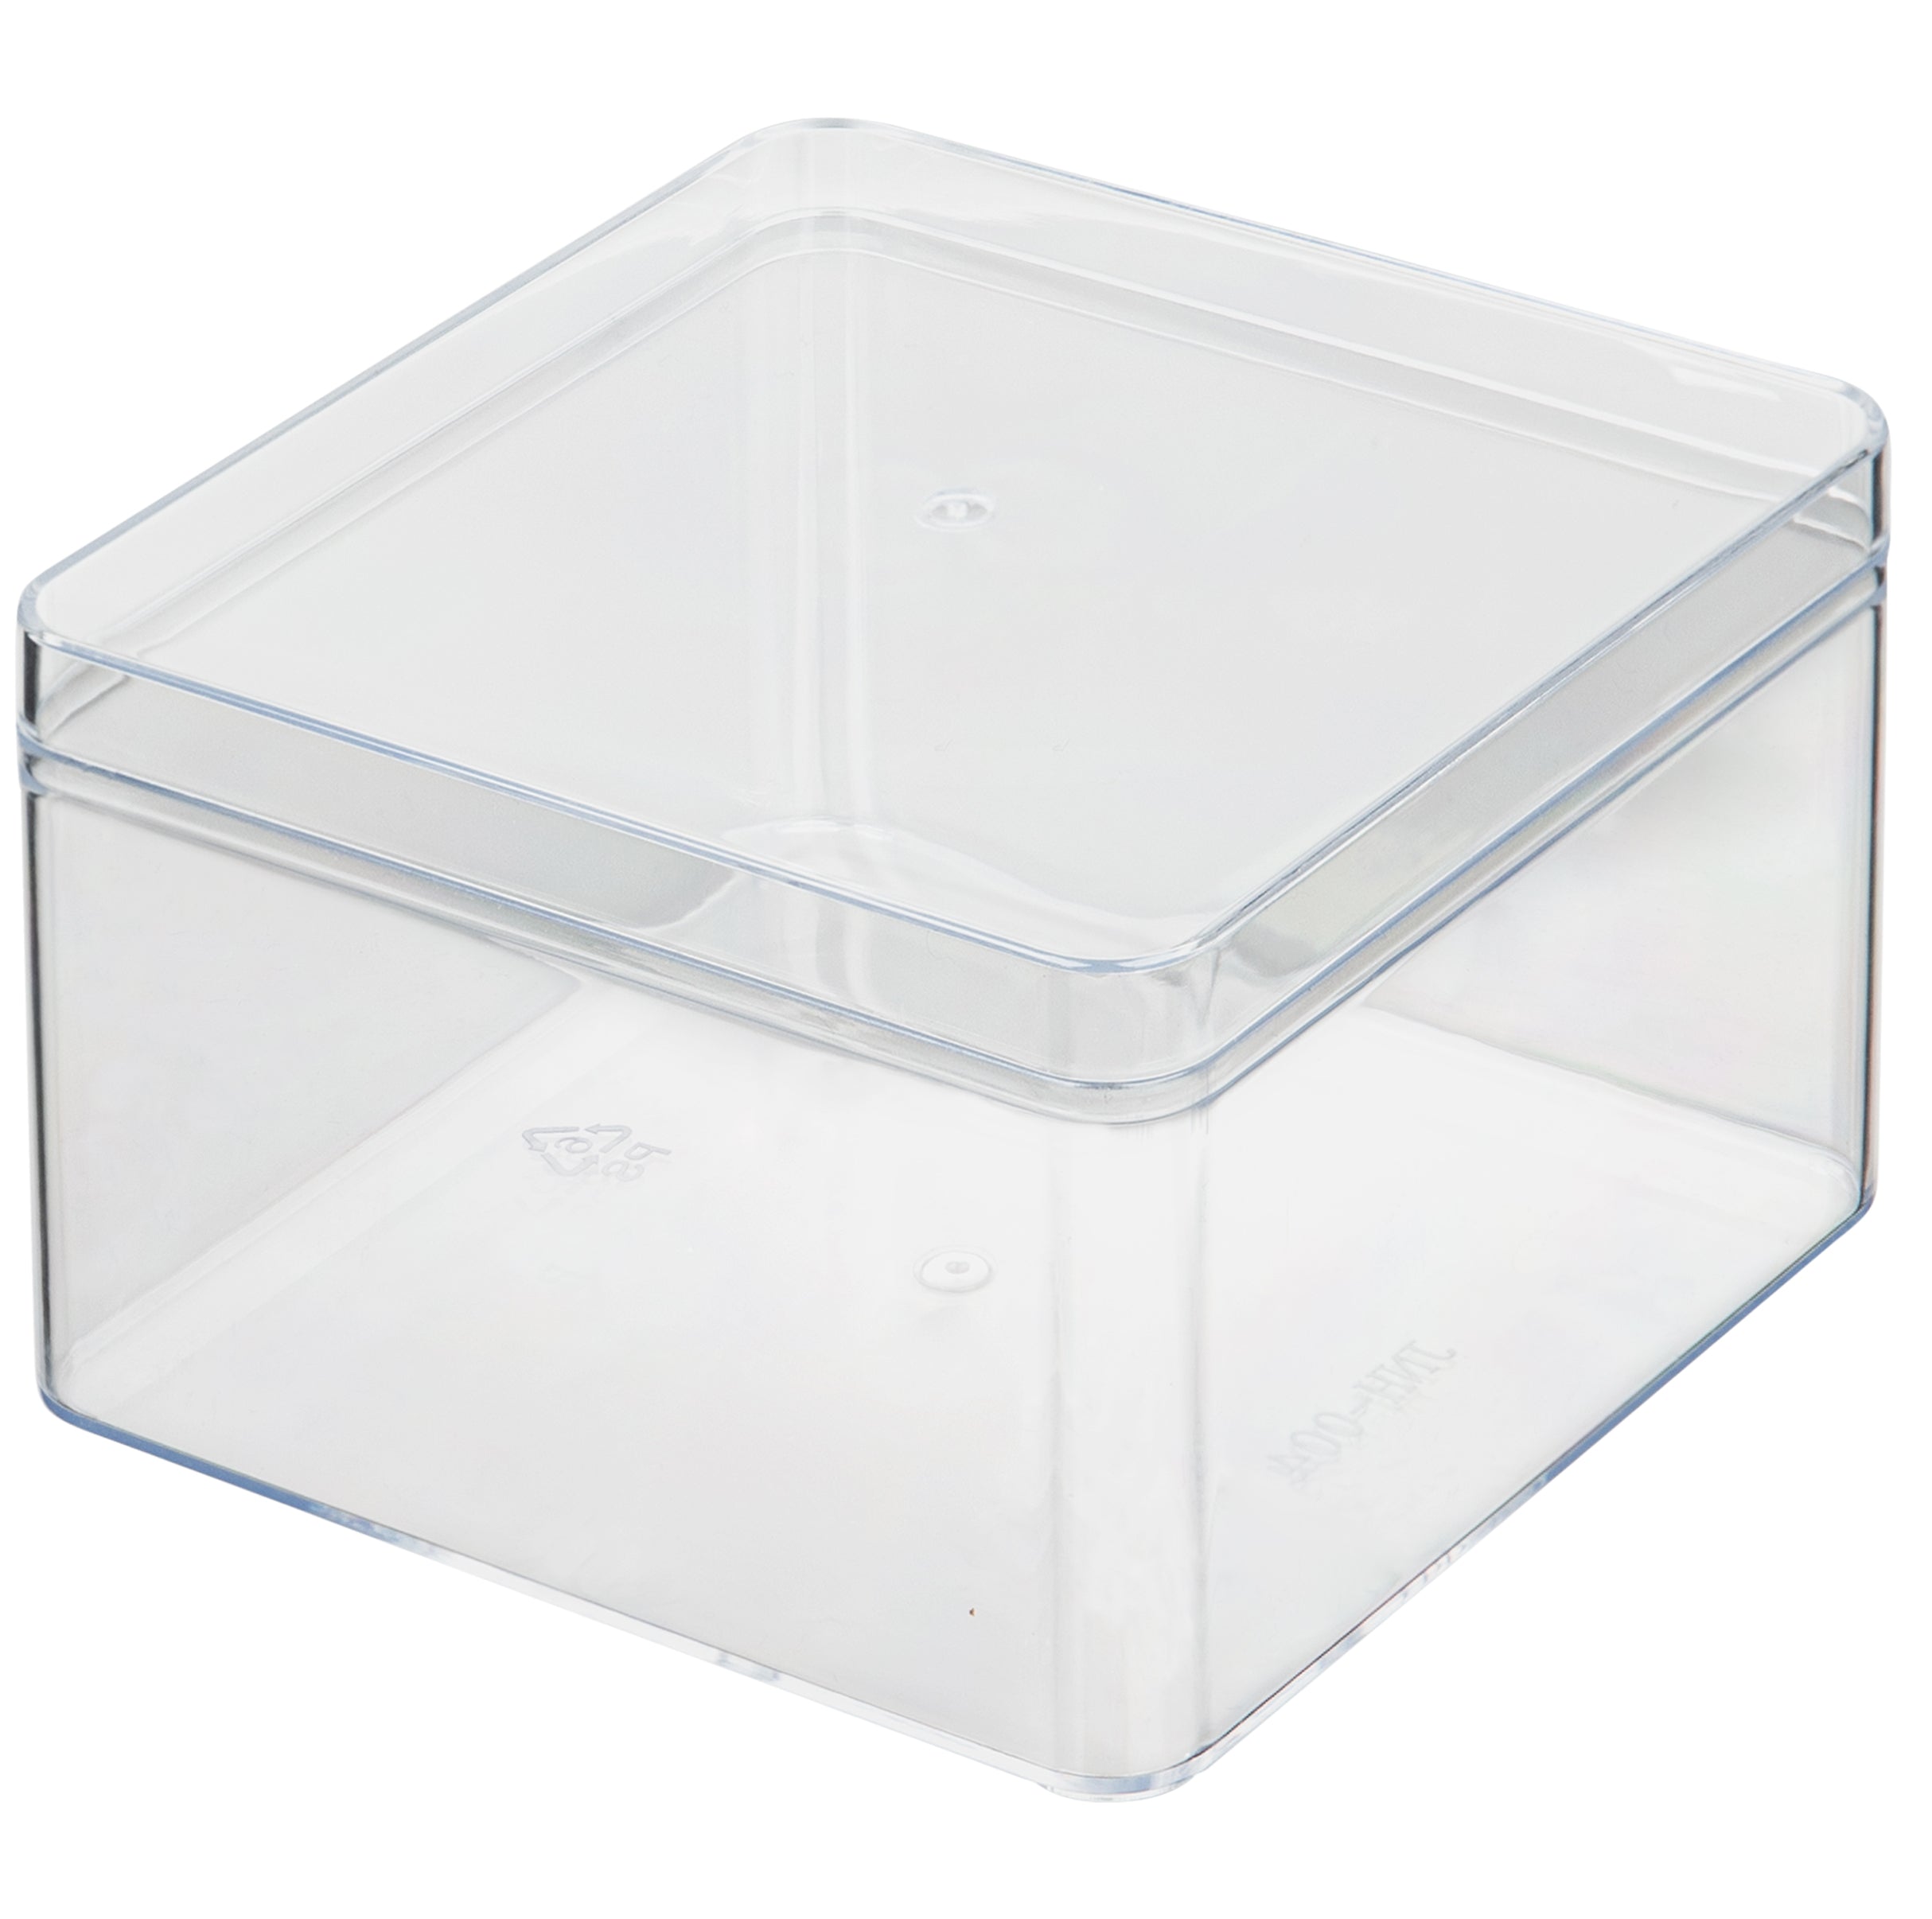  Hiceeden 12 Pack Small Plastic Storage Box with Lid, 5.3x3x2  Stackable Clear Latch Storage Case Bins Organizer Container for Craft  Items, Jewelry Beads, 6 Colors